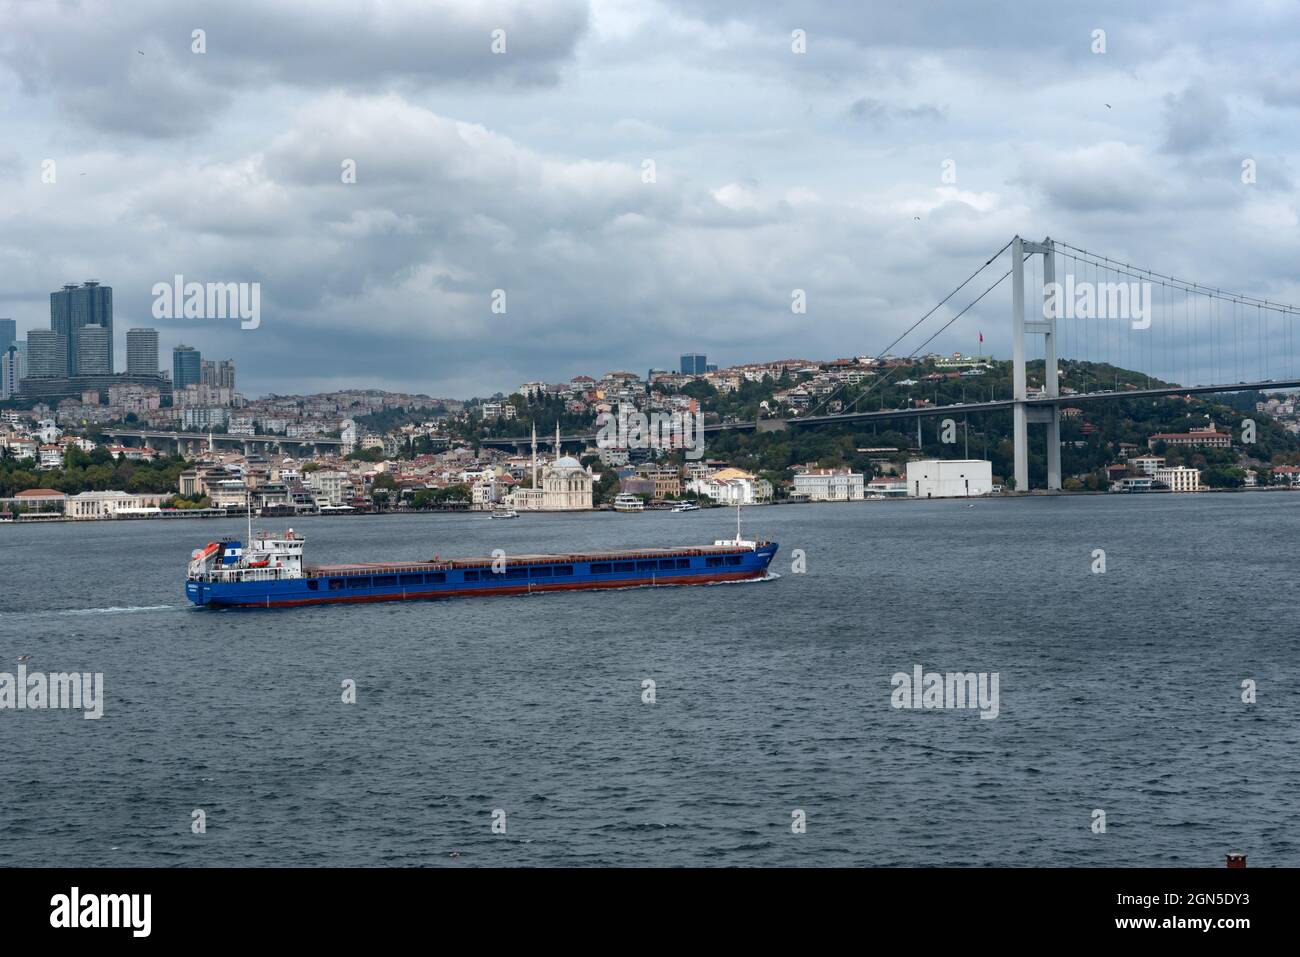 Istanbul, Turkey. September 21st 2021 A commercial container ship heading towards the Black Sea along the Bosphorus straight dividing European and Asi Stock Photo